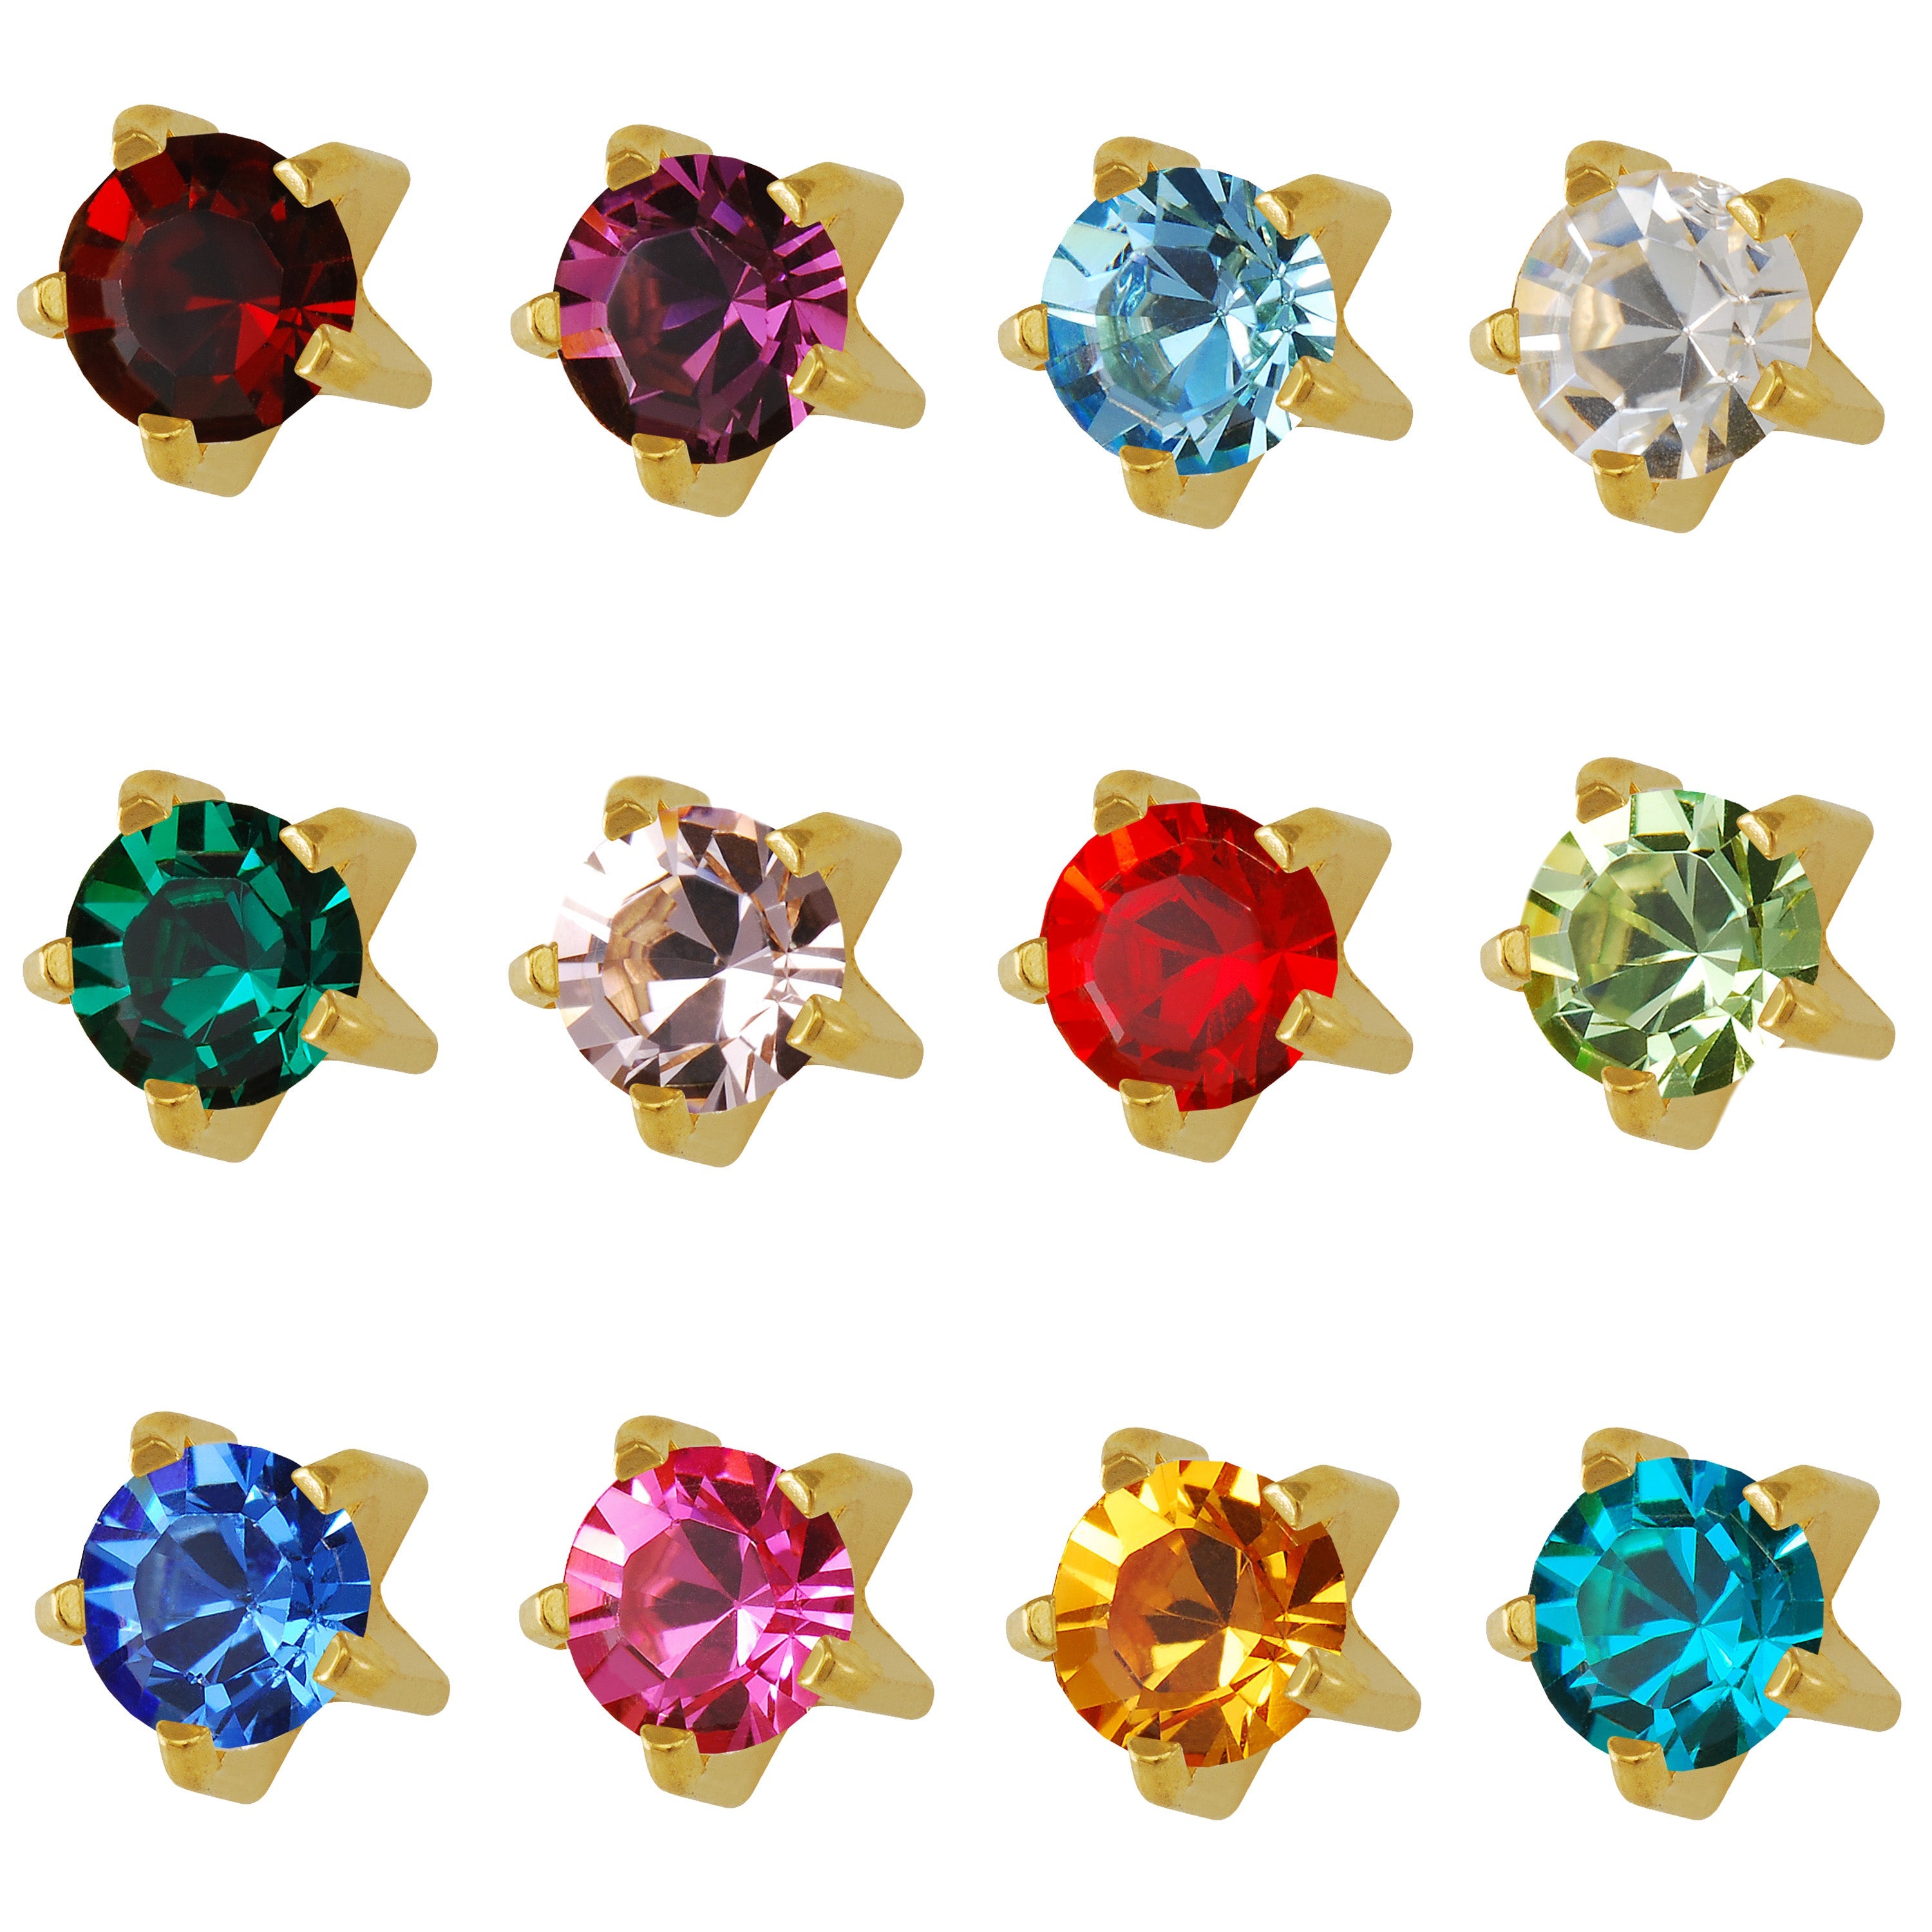 4MM Assorted January – December Birthstone Gold Plated Piercing Ear Stud (12 Pair)